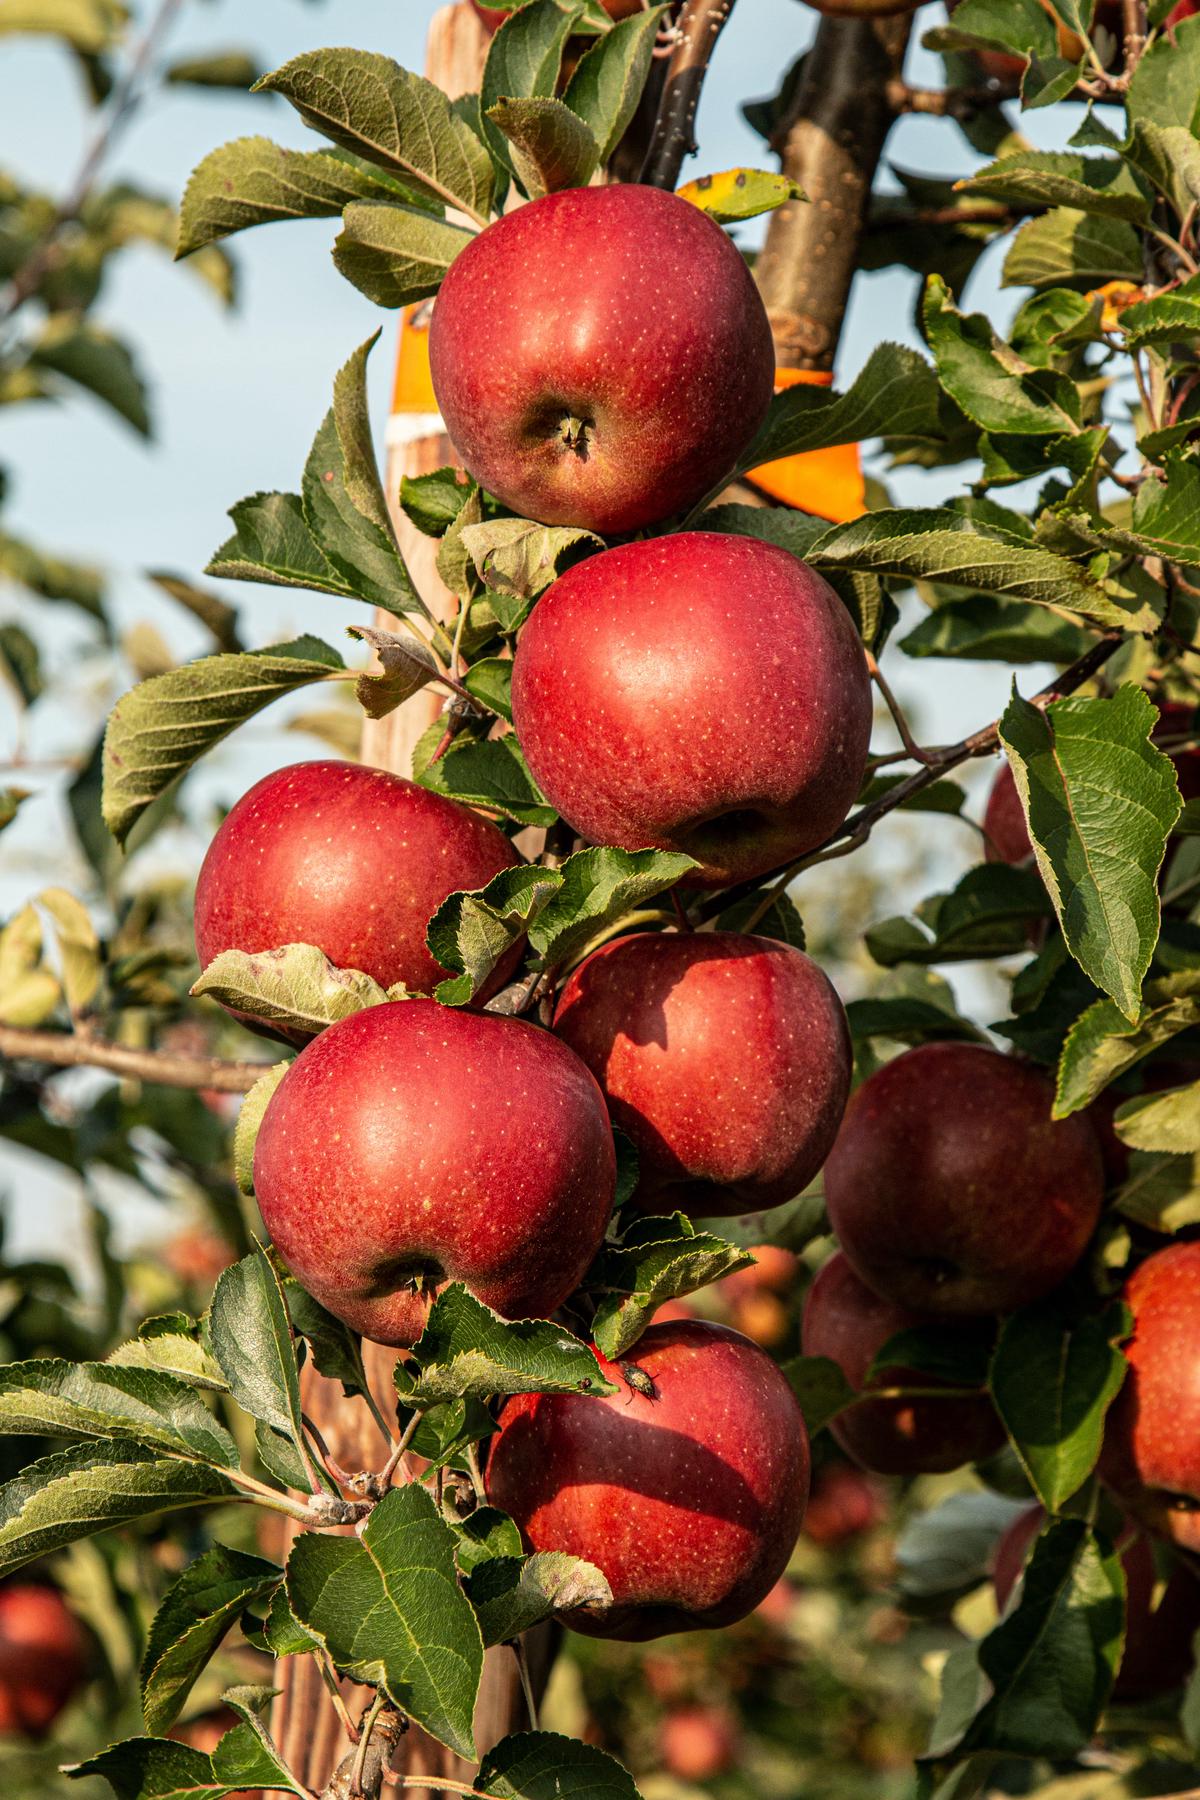 Genetically modified (GM) apples with extended shelf life and altered physical and chemical characteristics